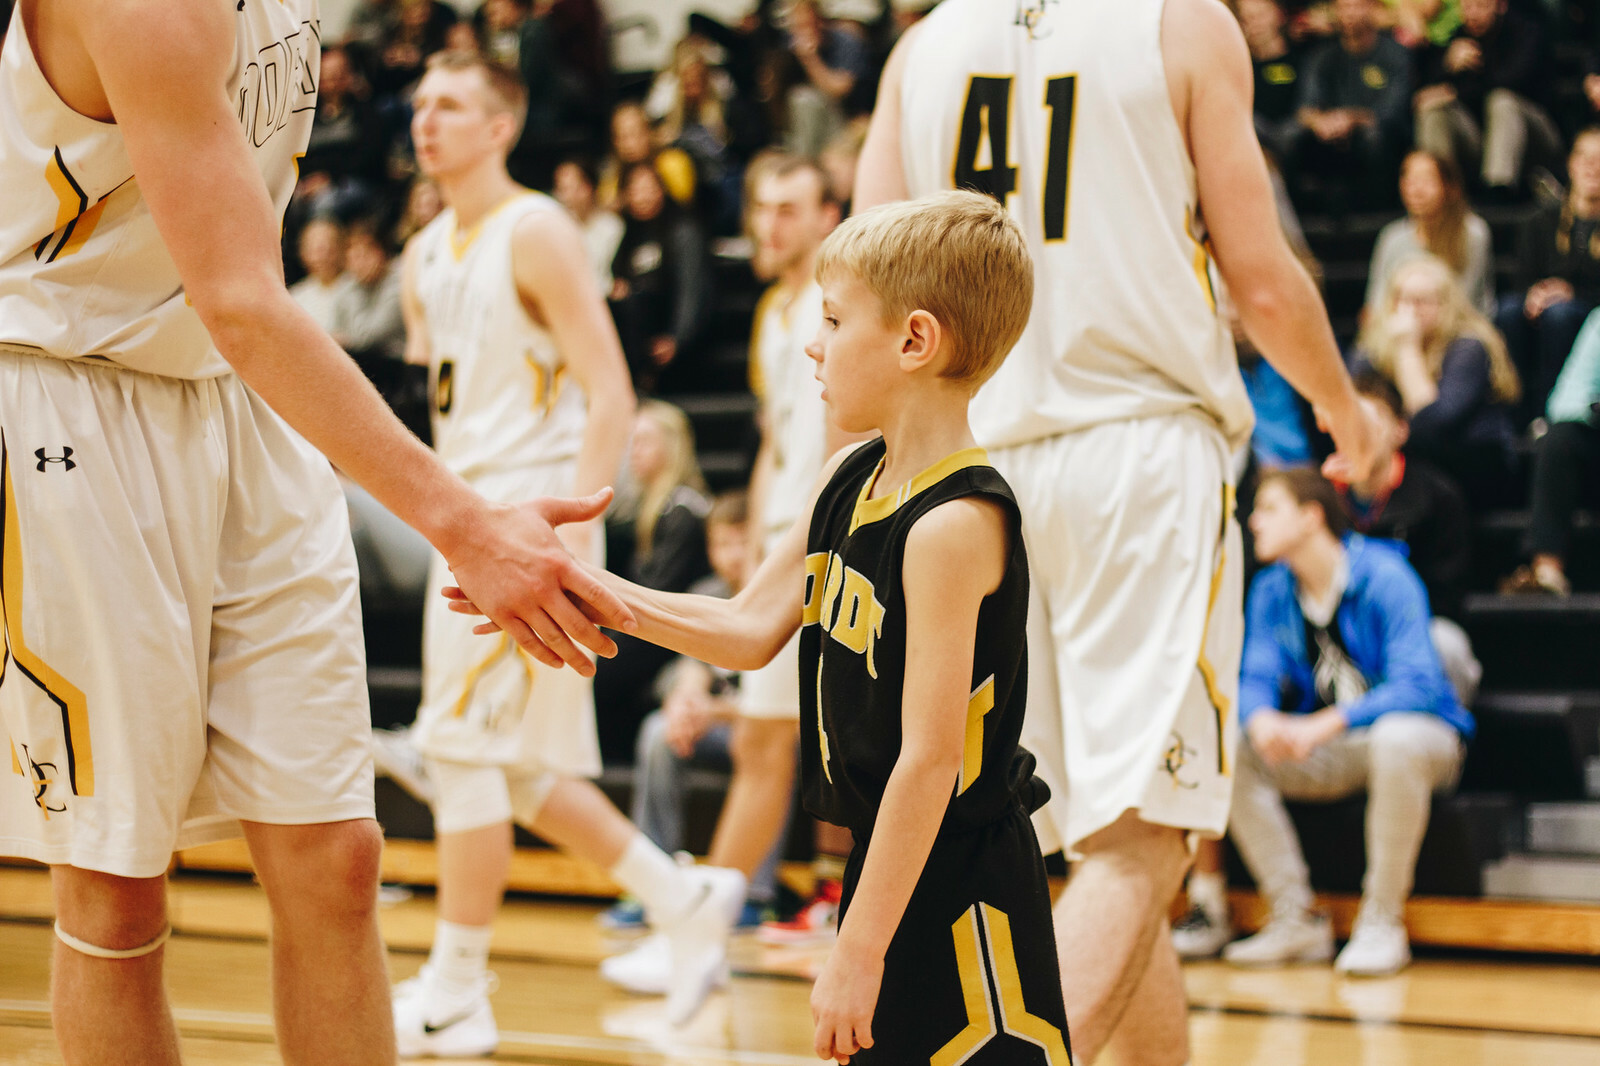 A child shakes a basketball player's hand